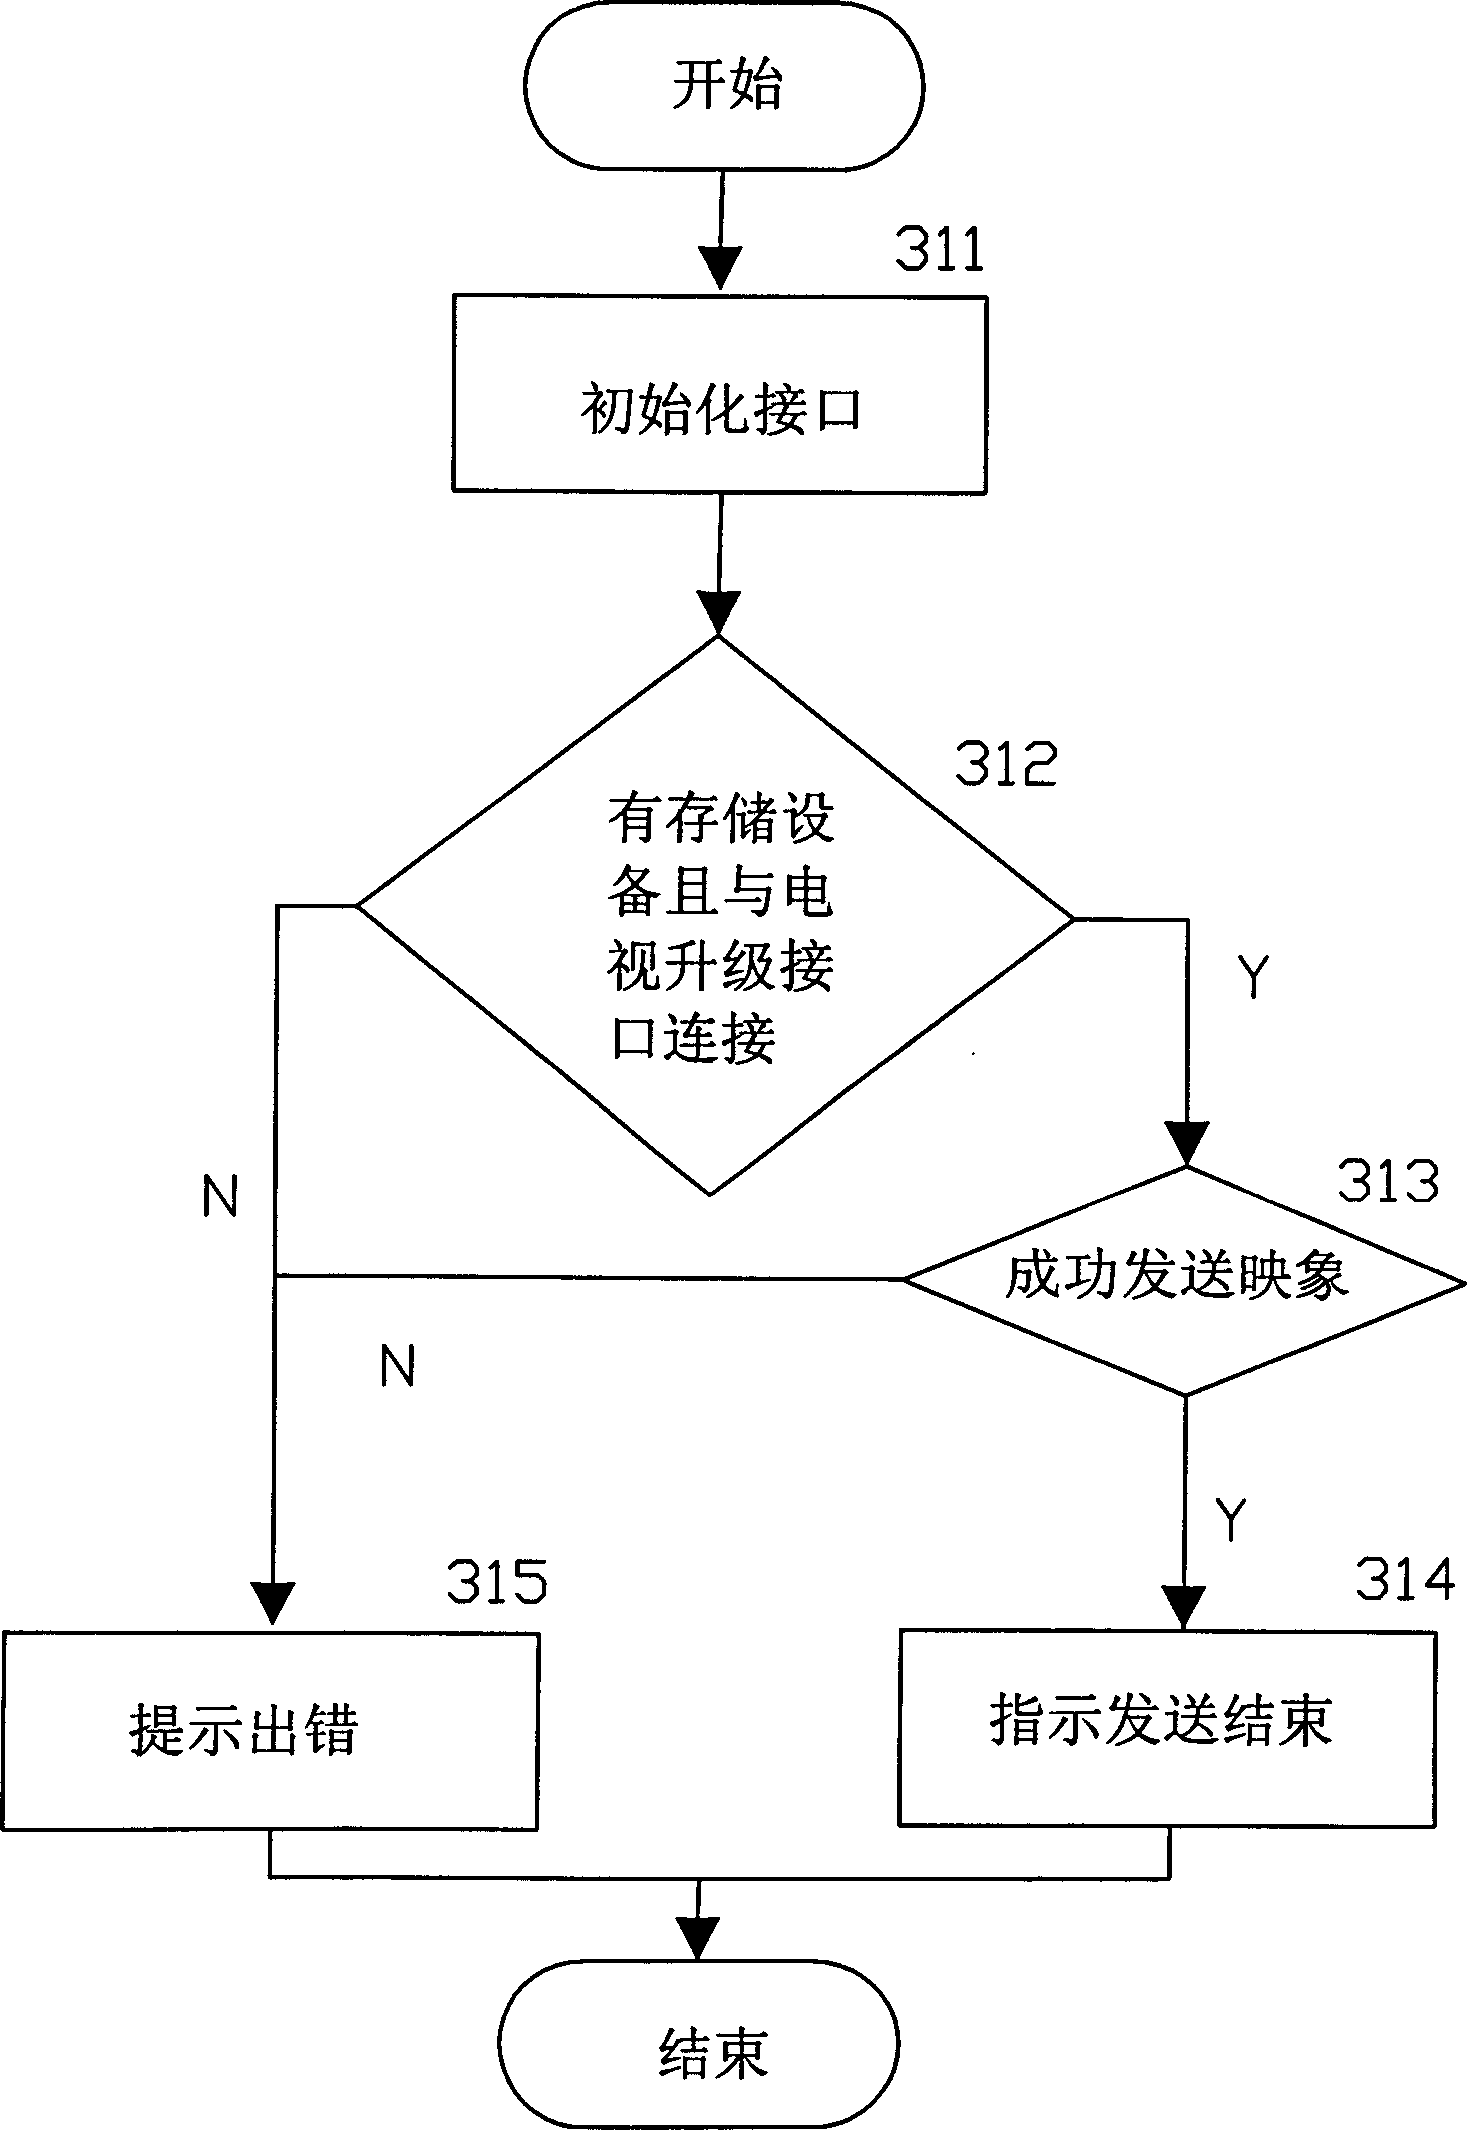 Method for carrying out TV set software upgrade and its device